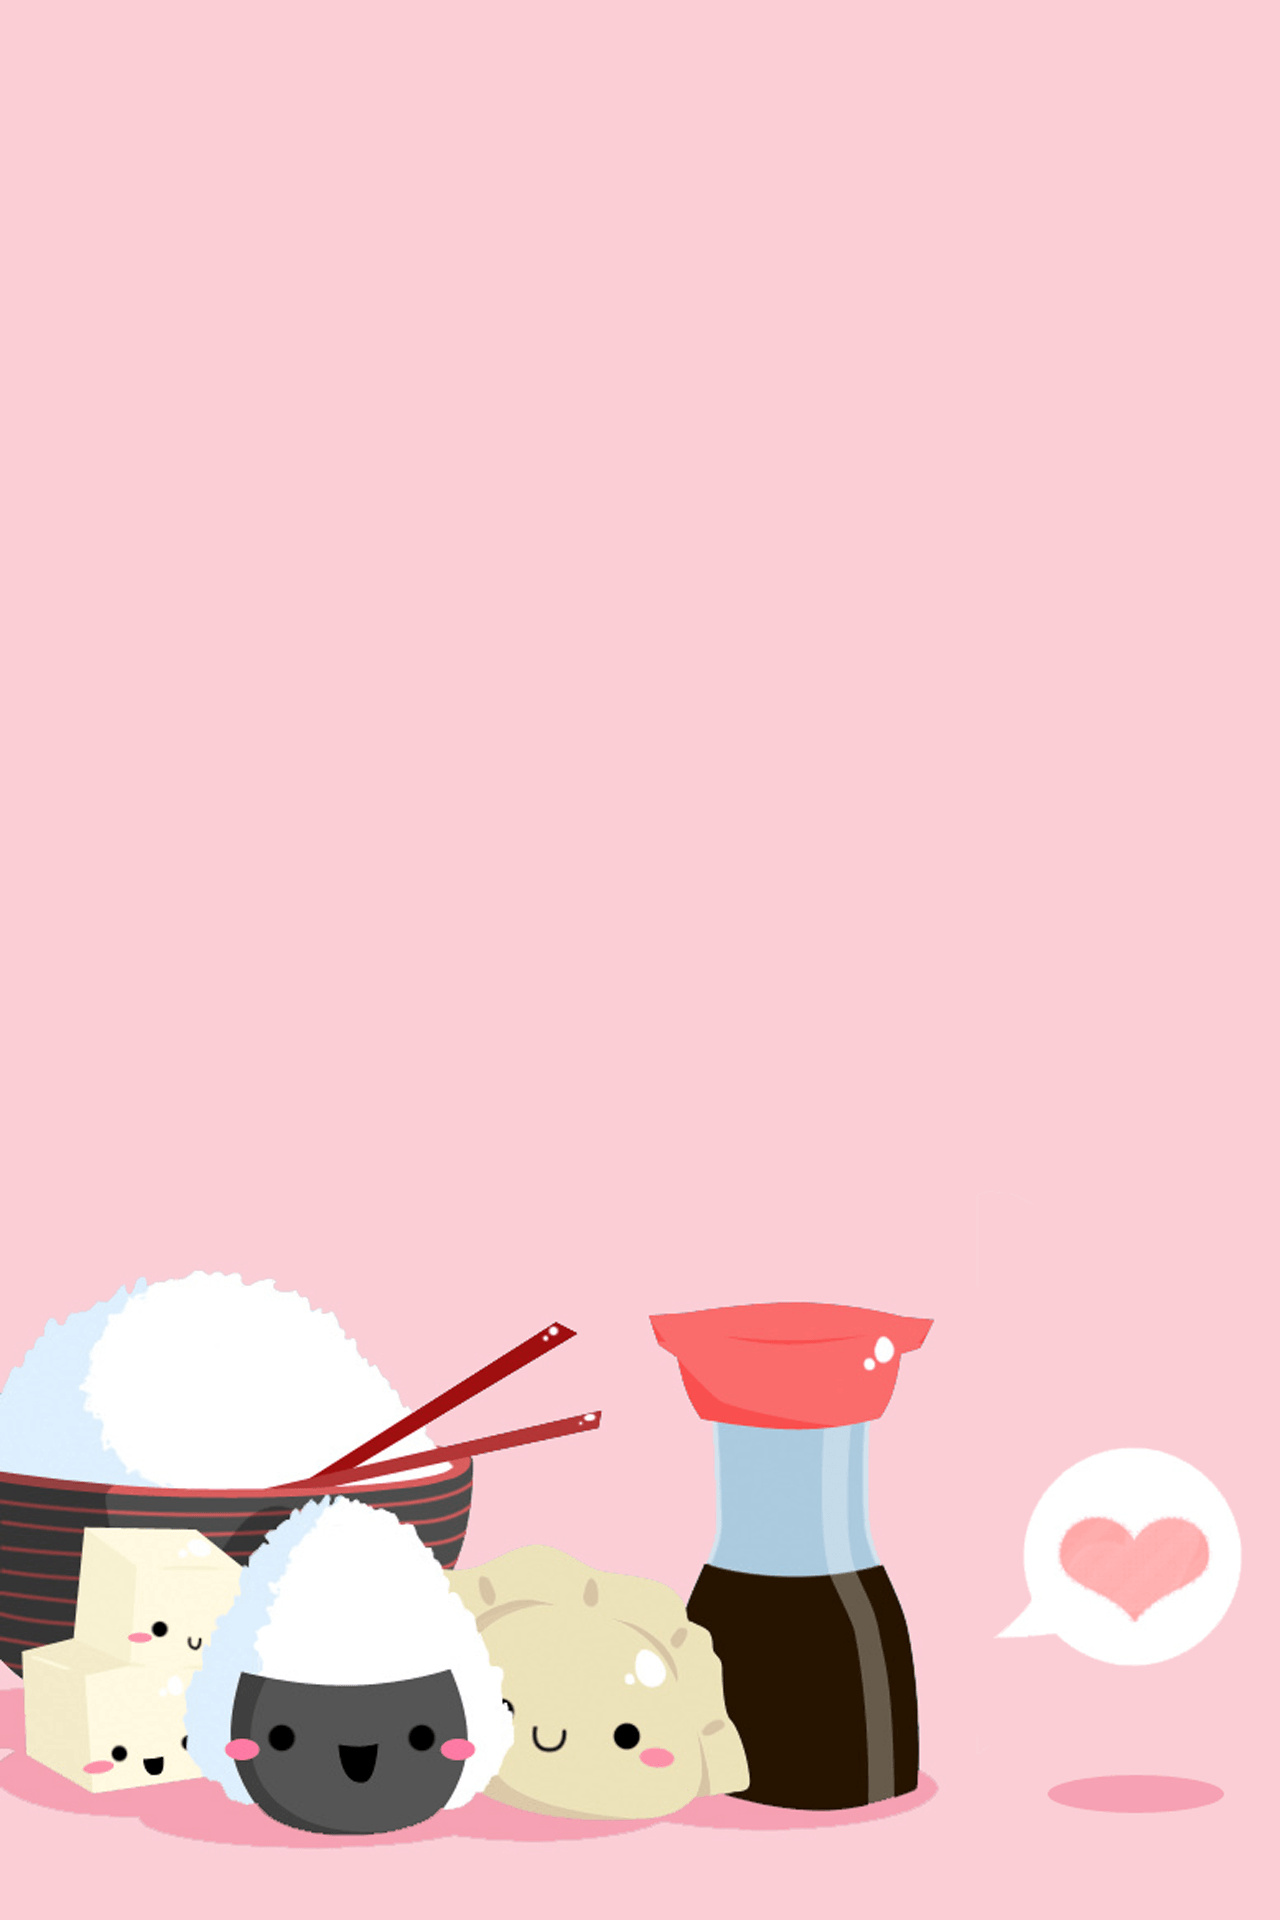 Kawaii phone wallpapers, Cute phone backgrounds, Charming and adorable, 1280x1920 HD Phone